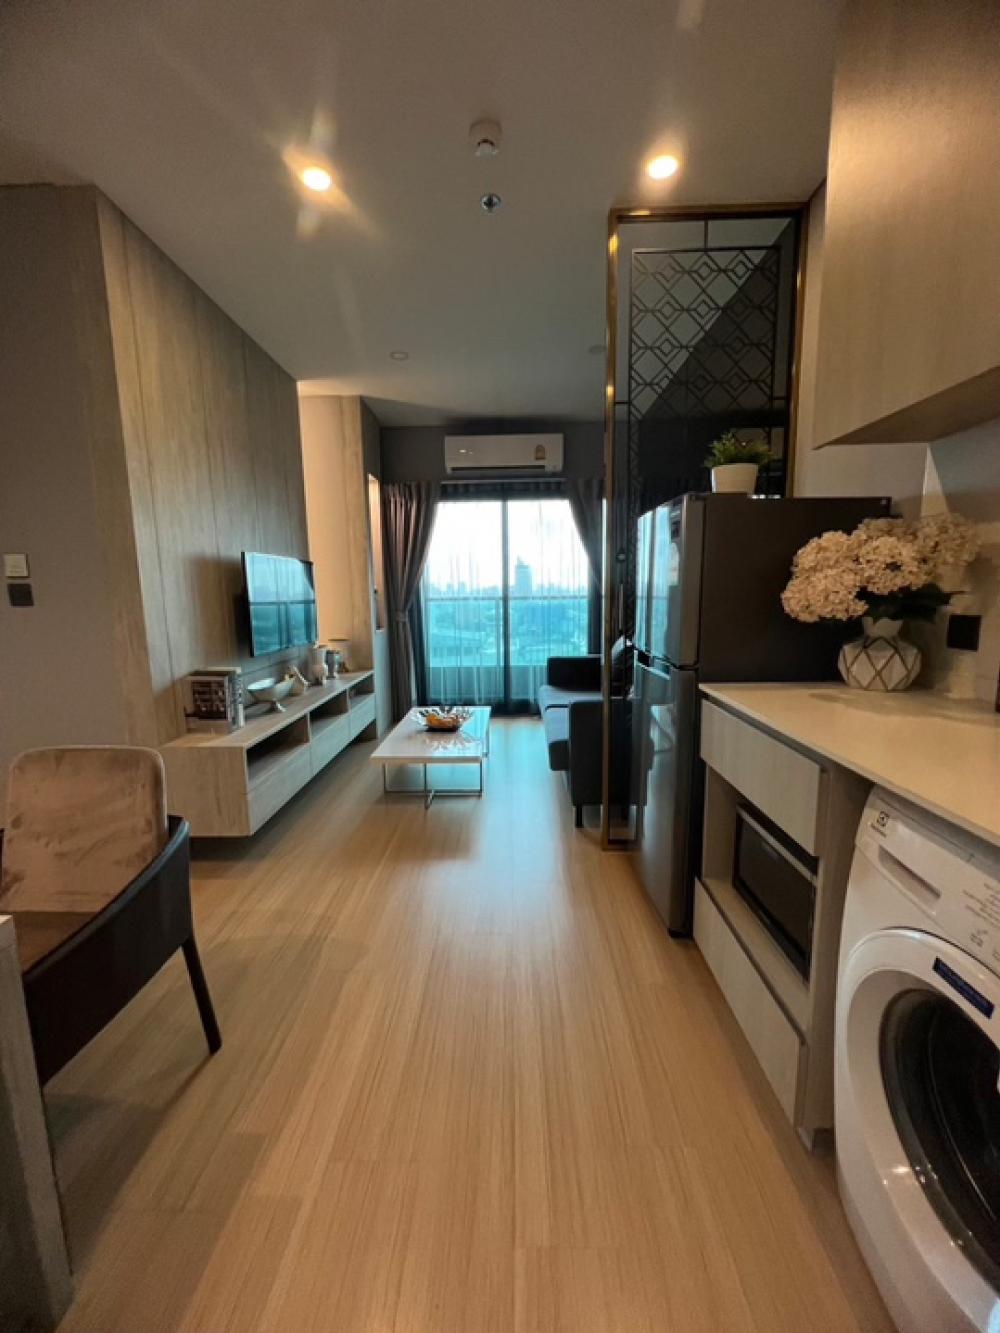 For SaleCondoRatchathewi,Phayathai : Condo for sale, Lumpini Suite Din Daeng - Ratchaprarop, 16th floor, fully furnished room with furniture and electrical appliances, usable area 46.92 sq m, 2 bedrooms, 1 bathrooms, beautiful view, convenient transportation, next to the main road, near the